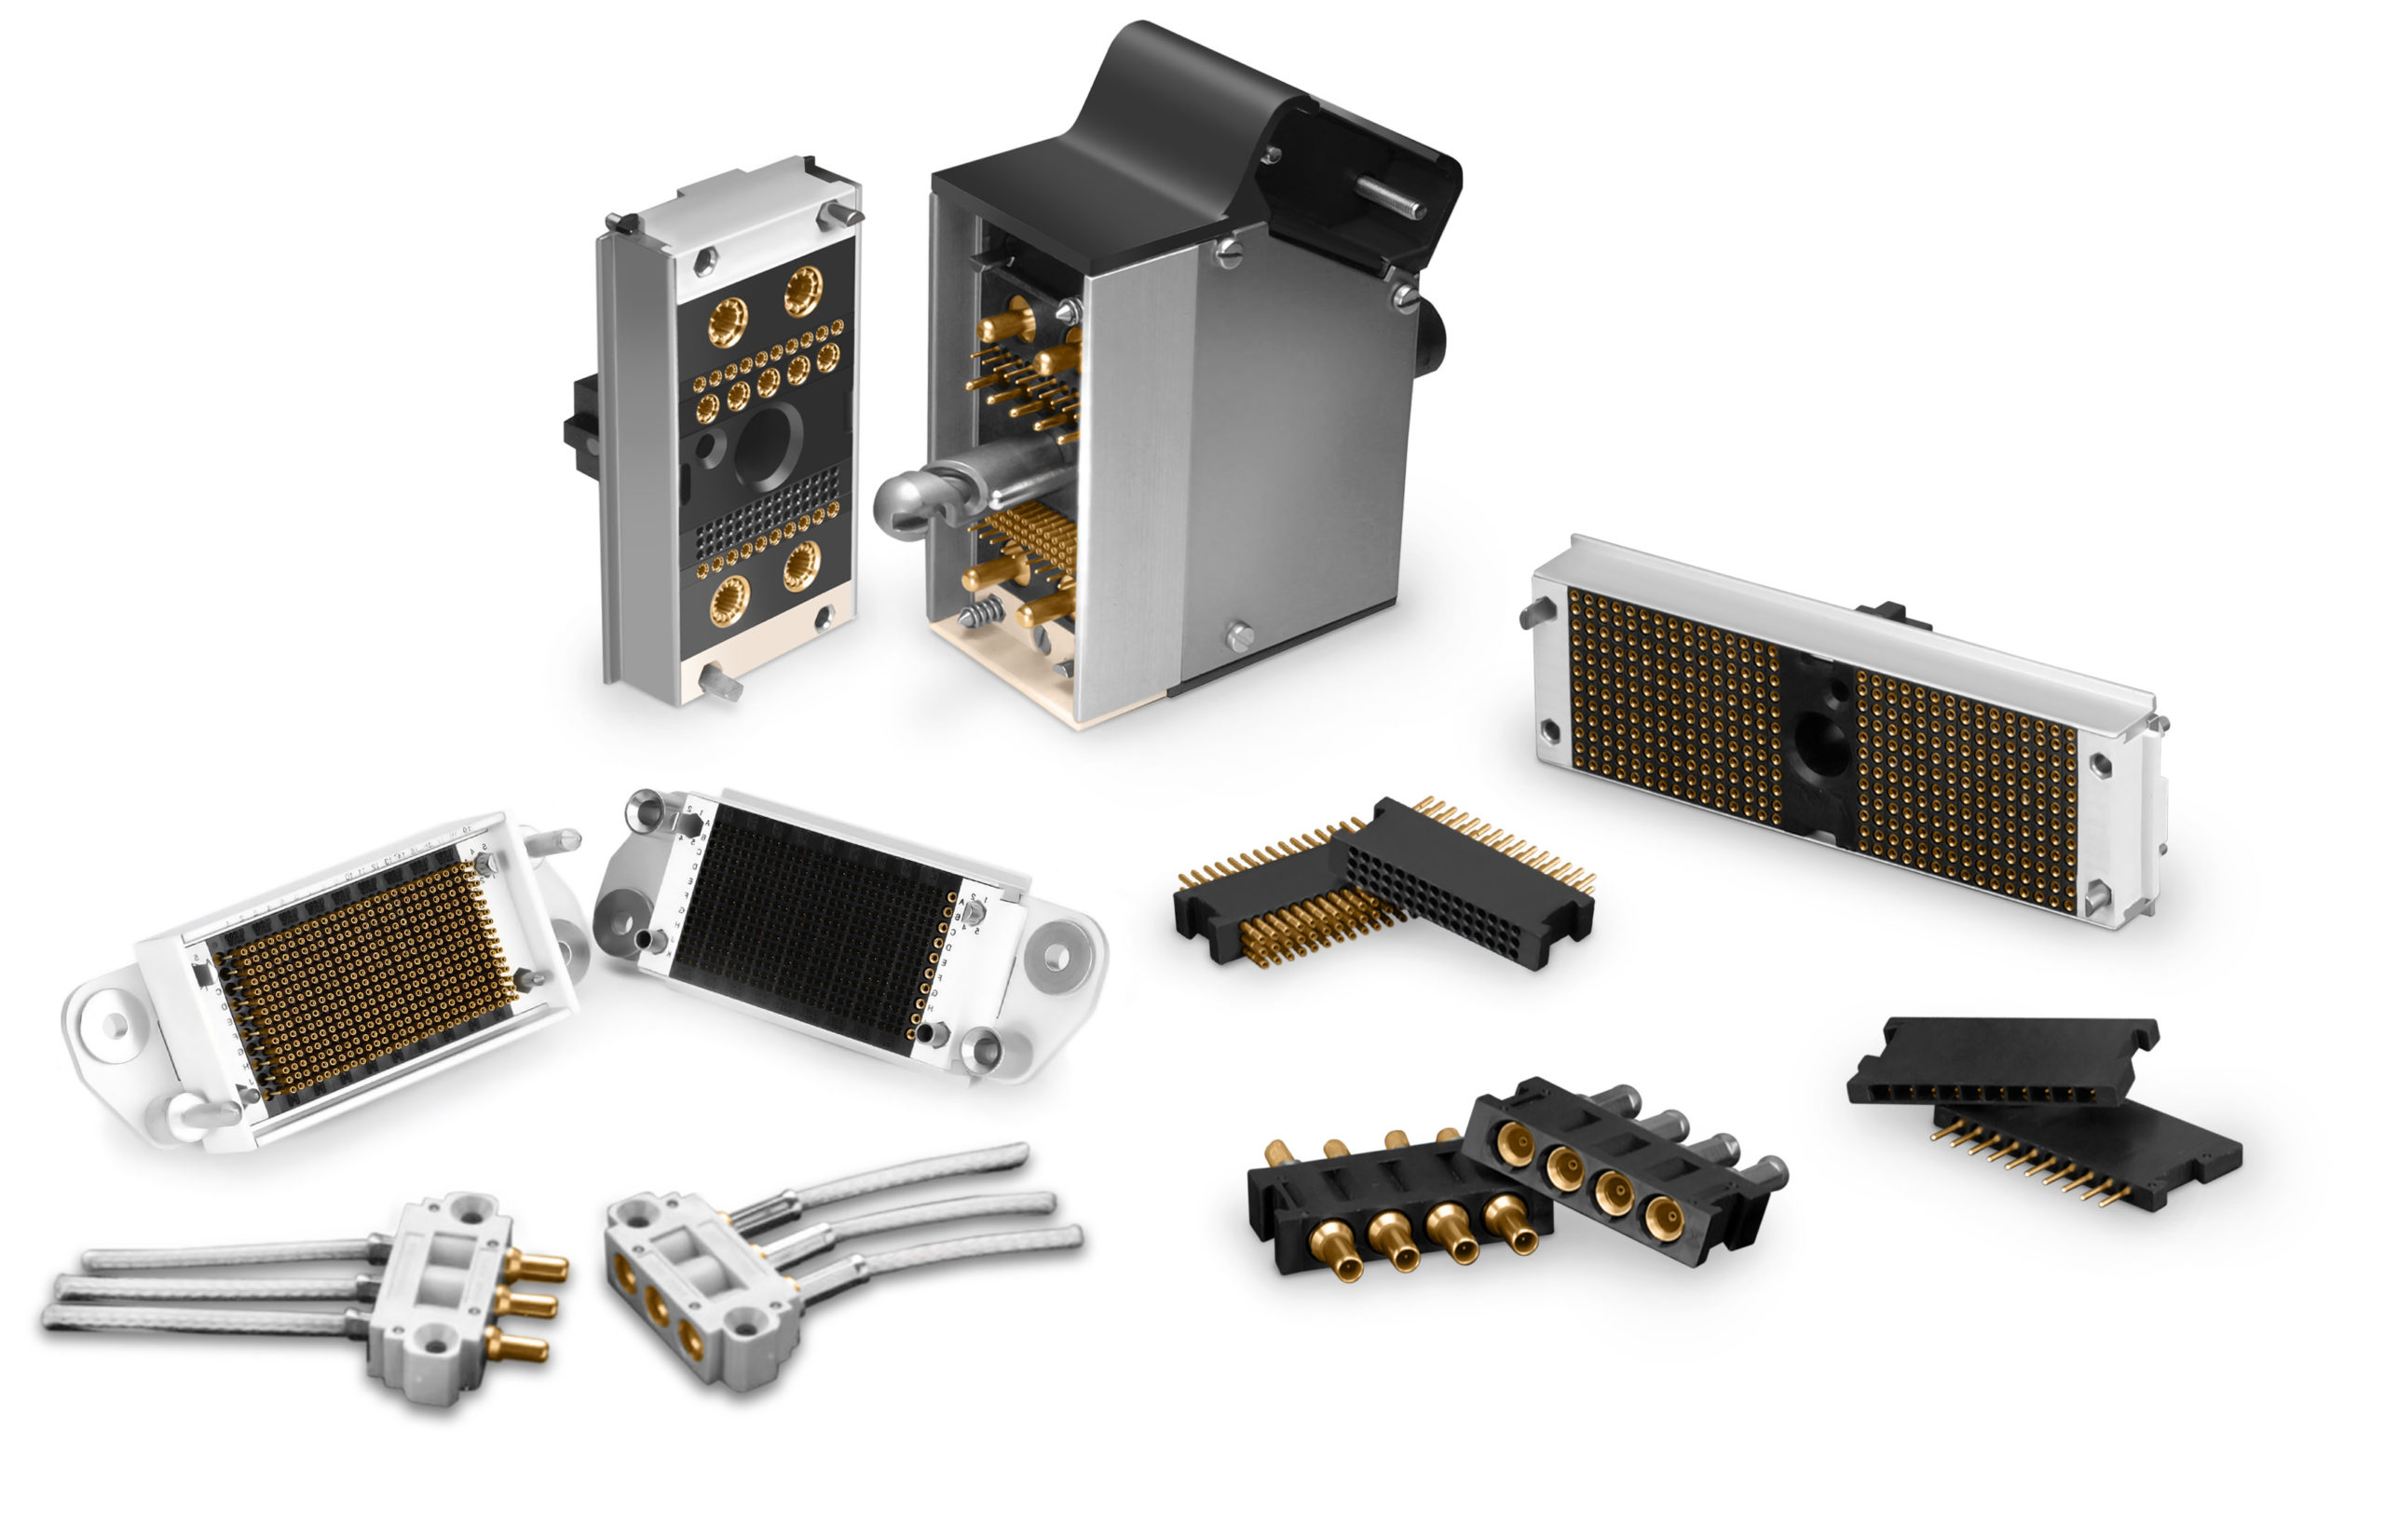 connectors for imaging equipment from Smiths Interconnect